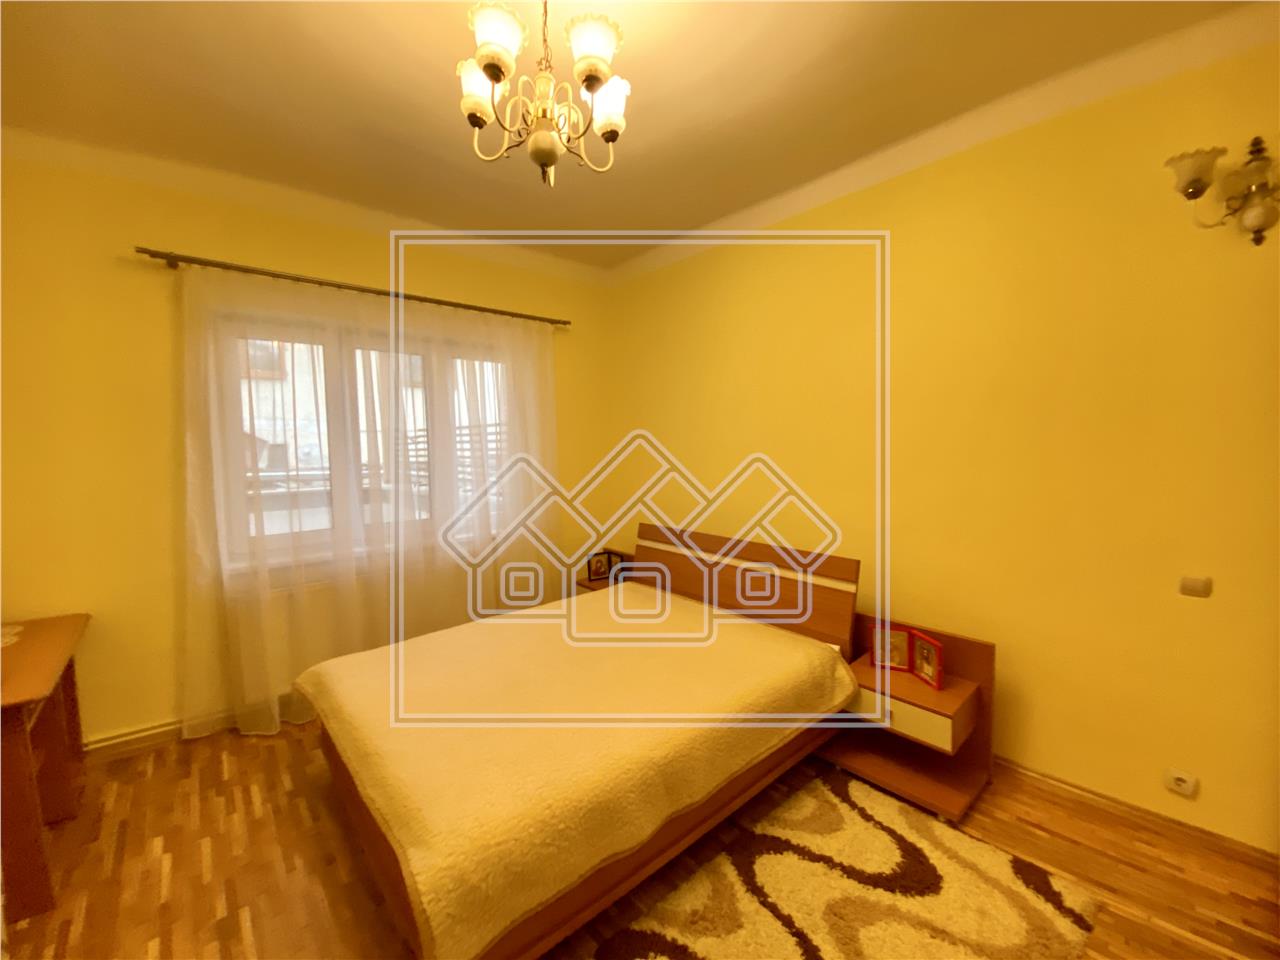 House for rent in Sibiu - Milea area - turnkey delivery